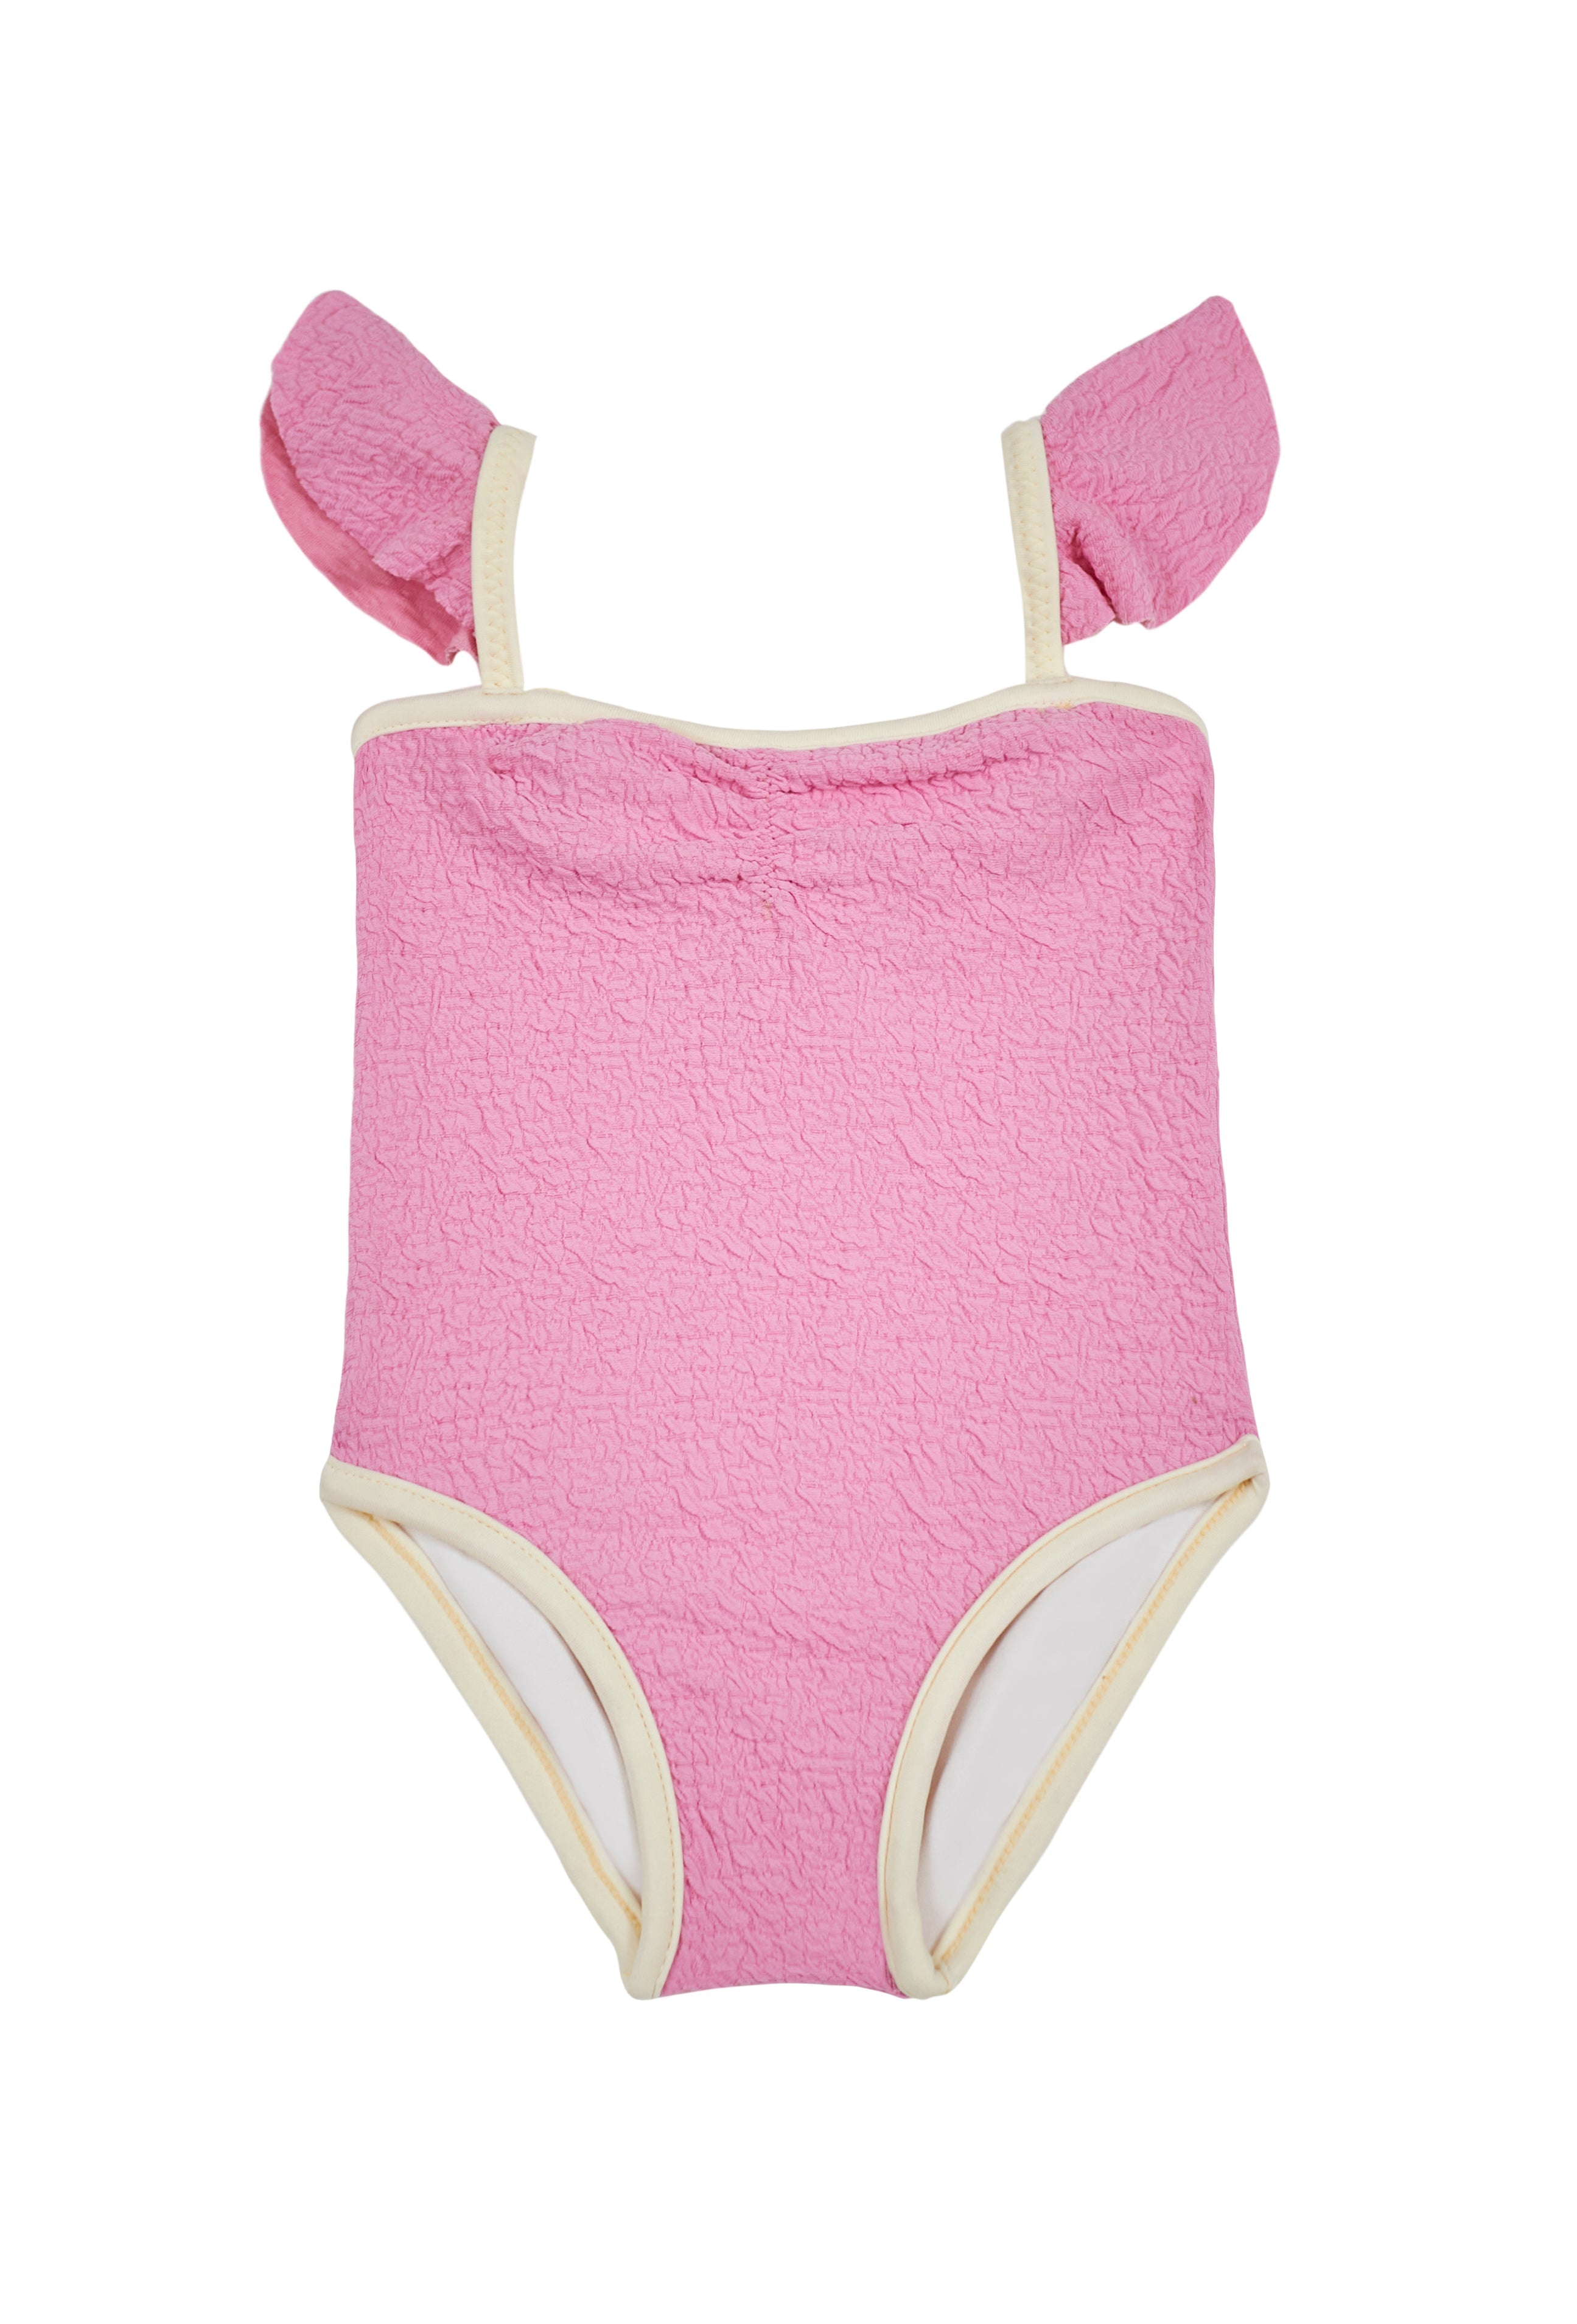 Little Vivi One-Piece Swimsuit by Hermoza